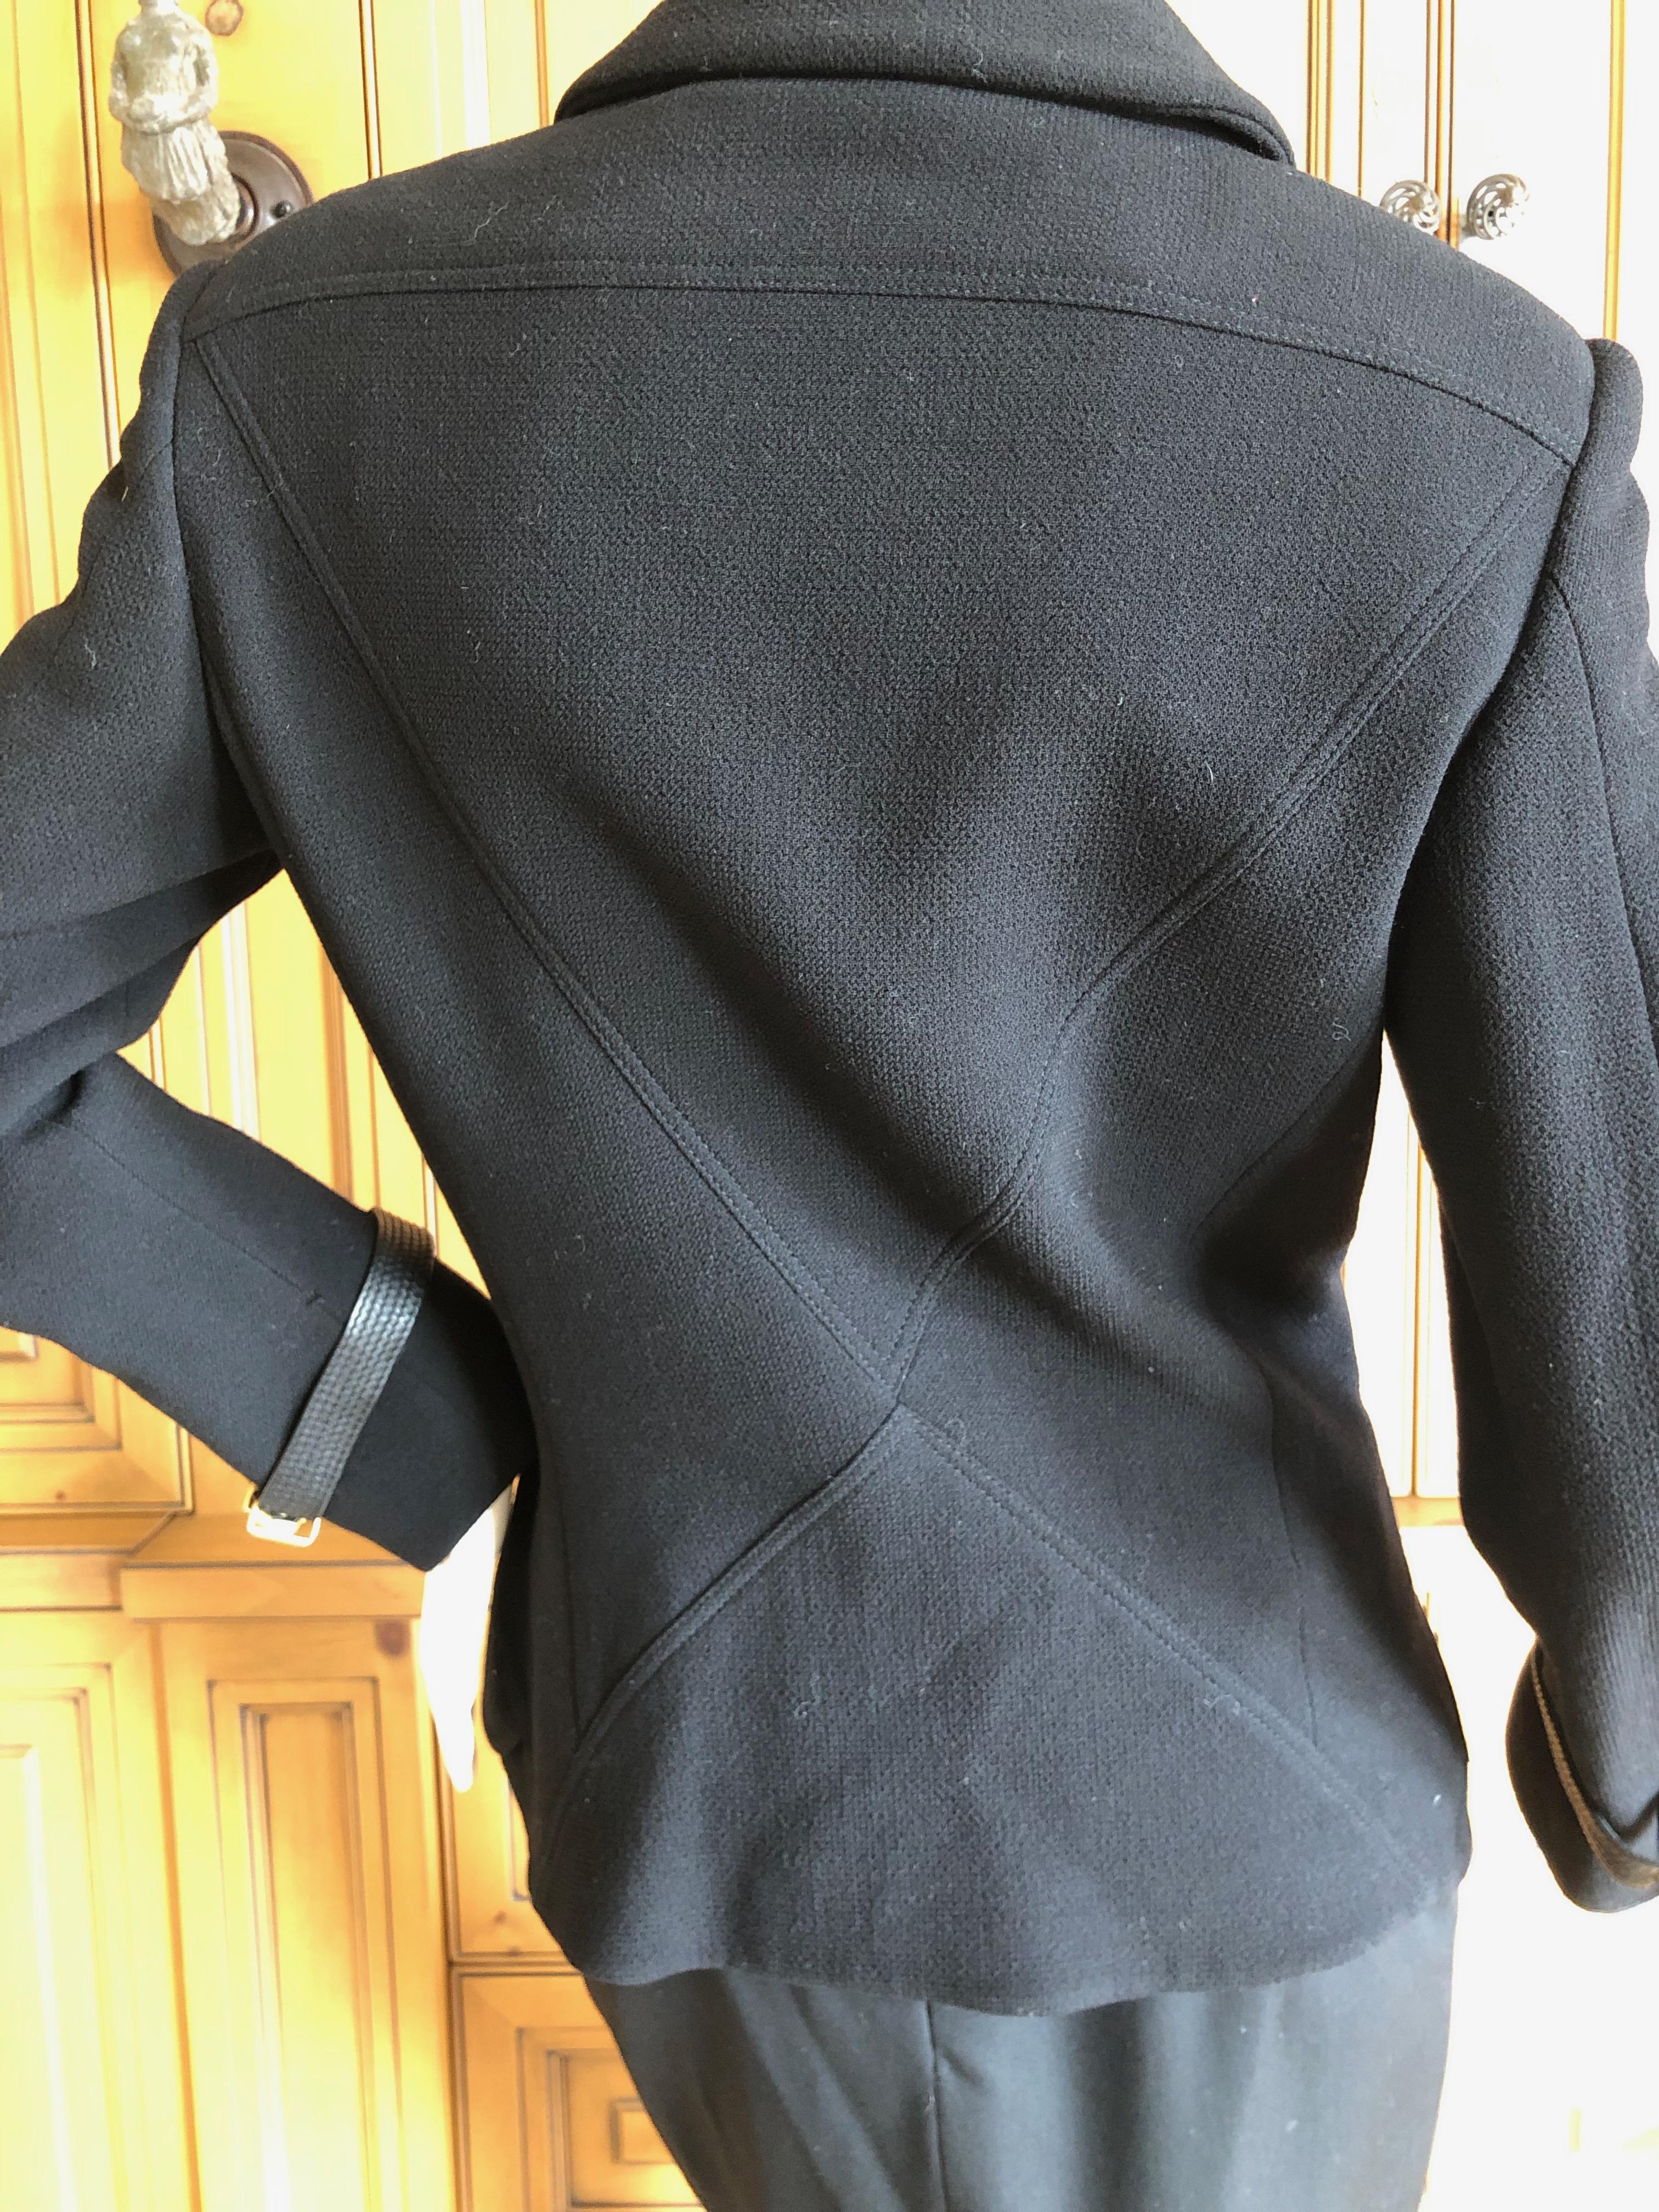 Gianni Versace Iconic Fall 1992 Black Wool Jacket with Buckle Strap Closures 7